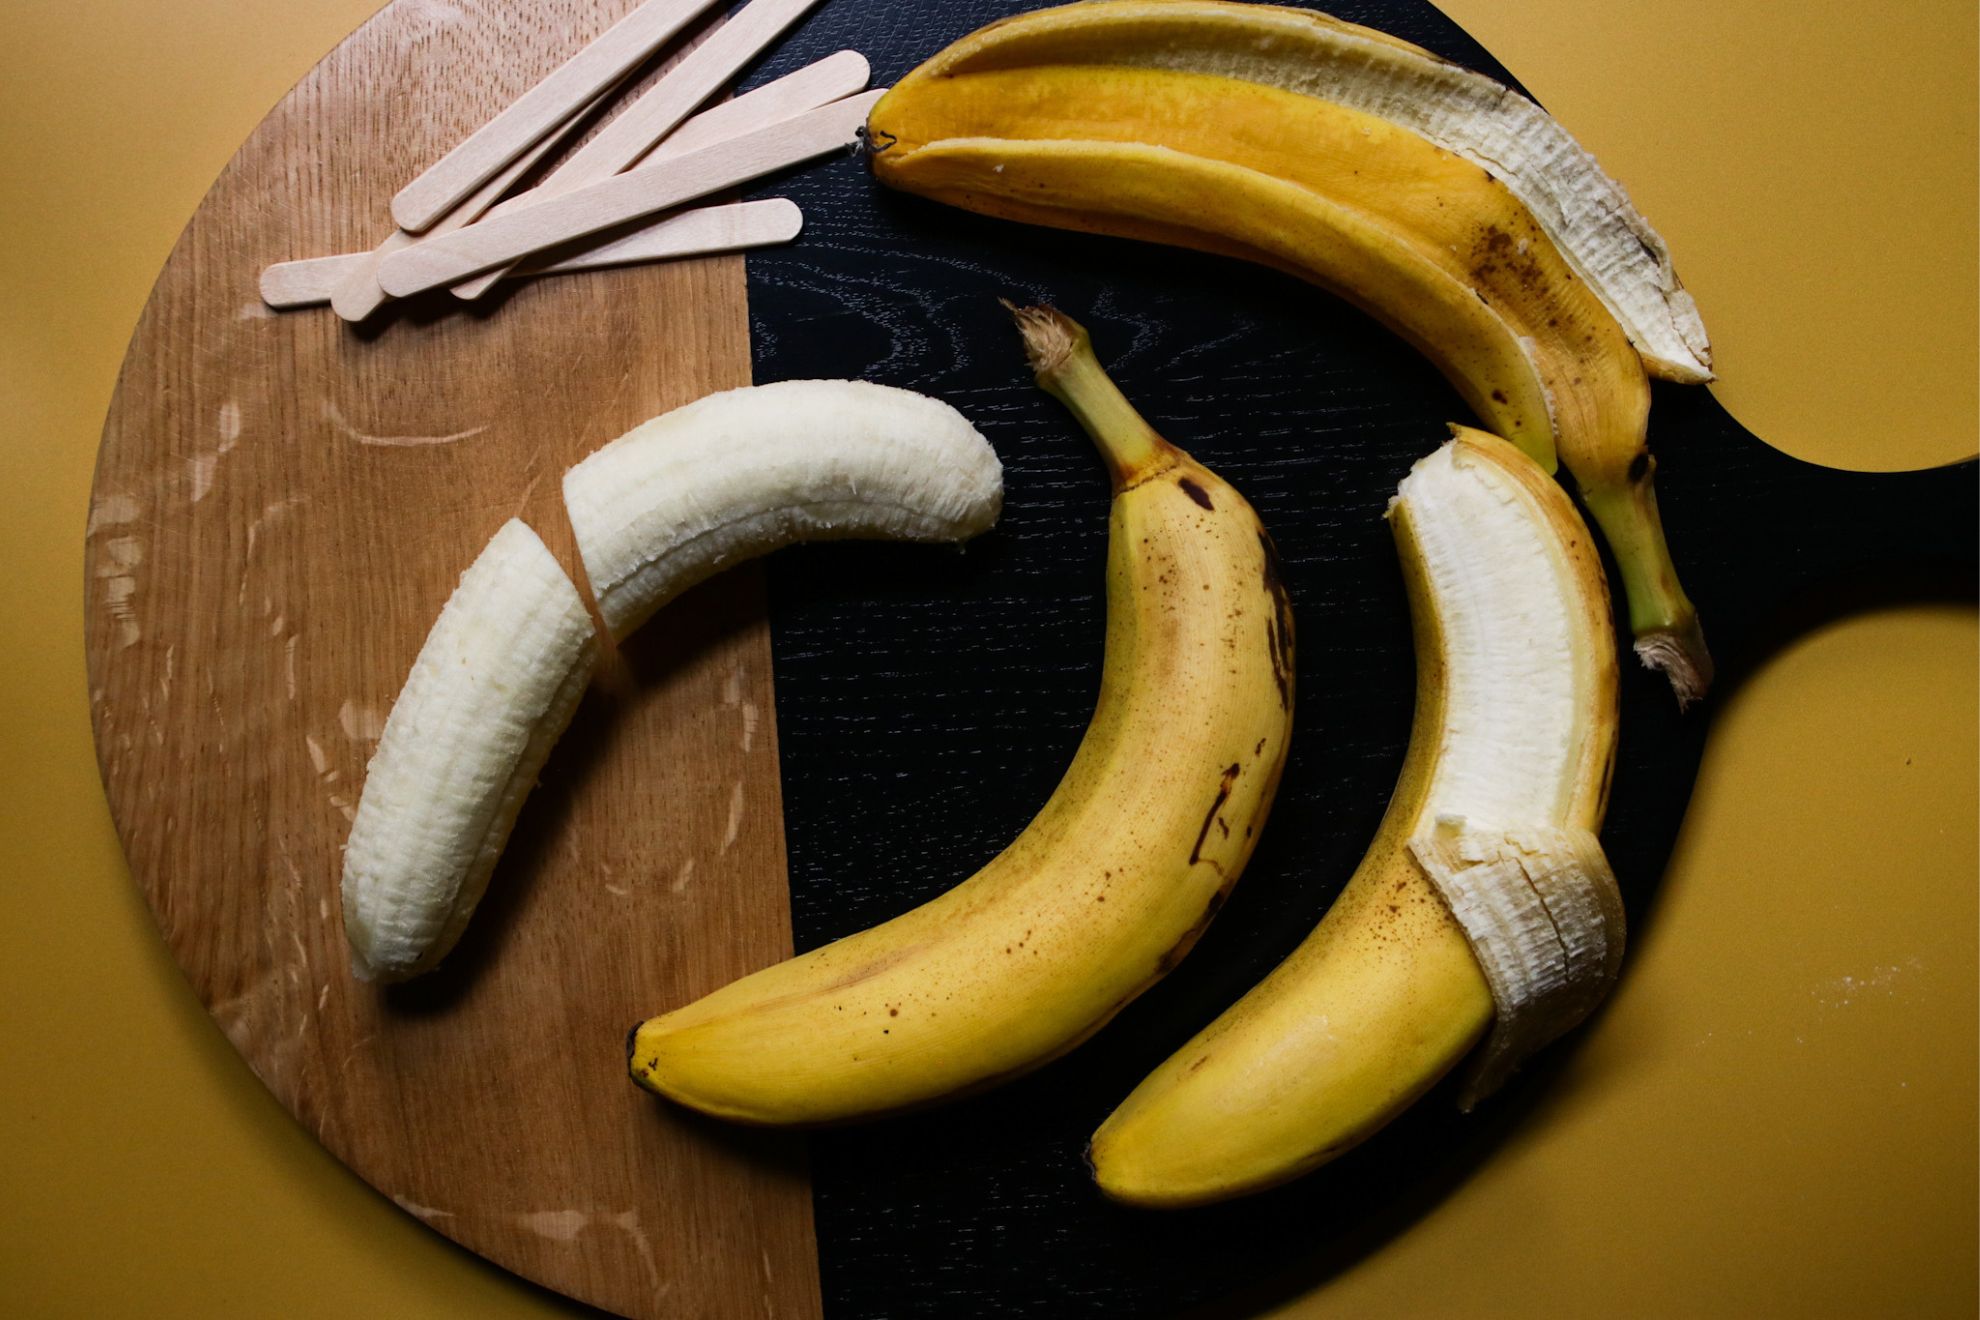 This is an overhead horizontal image of a black and wood circle cutting board on a yellow surface. On the cutting board are three bananas. One is peeled, one is partially peeled and one still has the peel on. Popsicle sticks are also on the cutting board at the top.